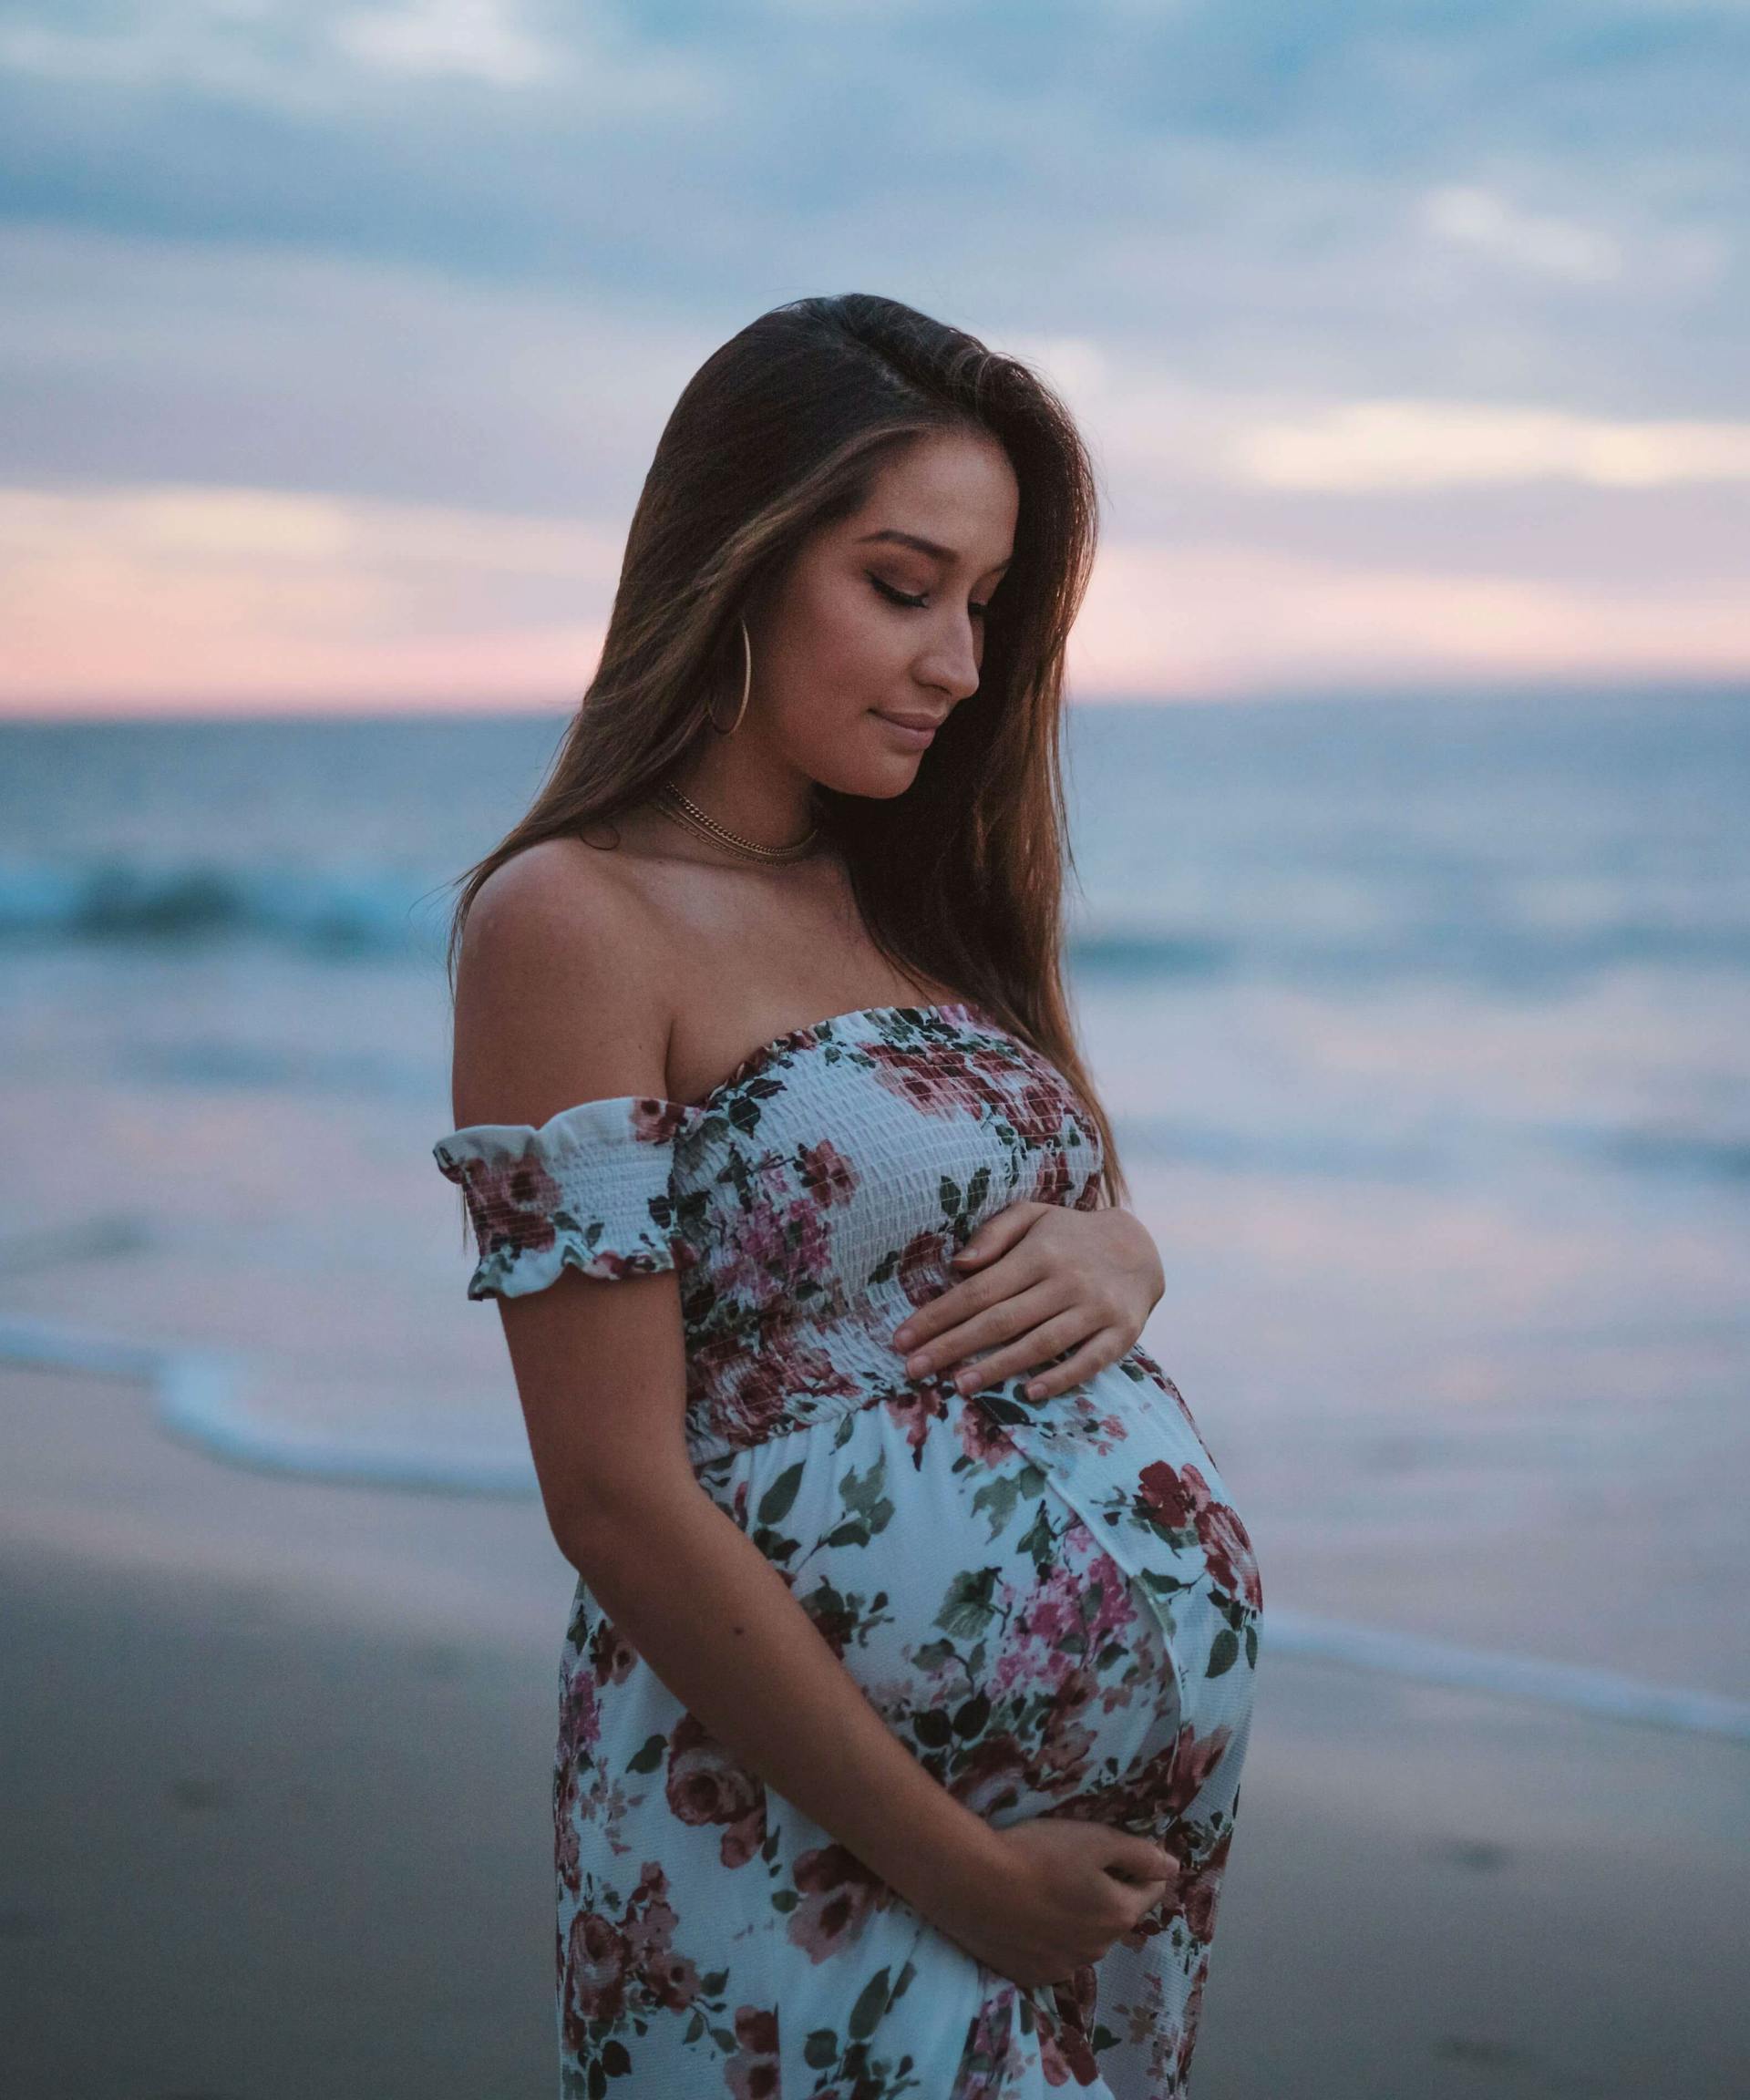 neal-e-johnson unsplash A Mother And Her Baby Are Connected Forever, Science Proves It